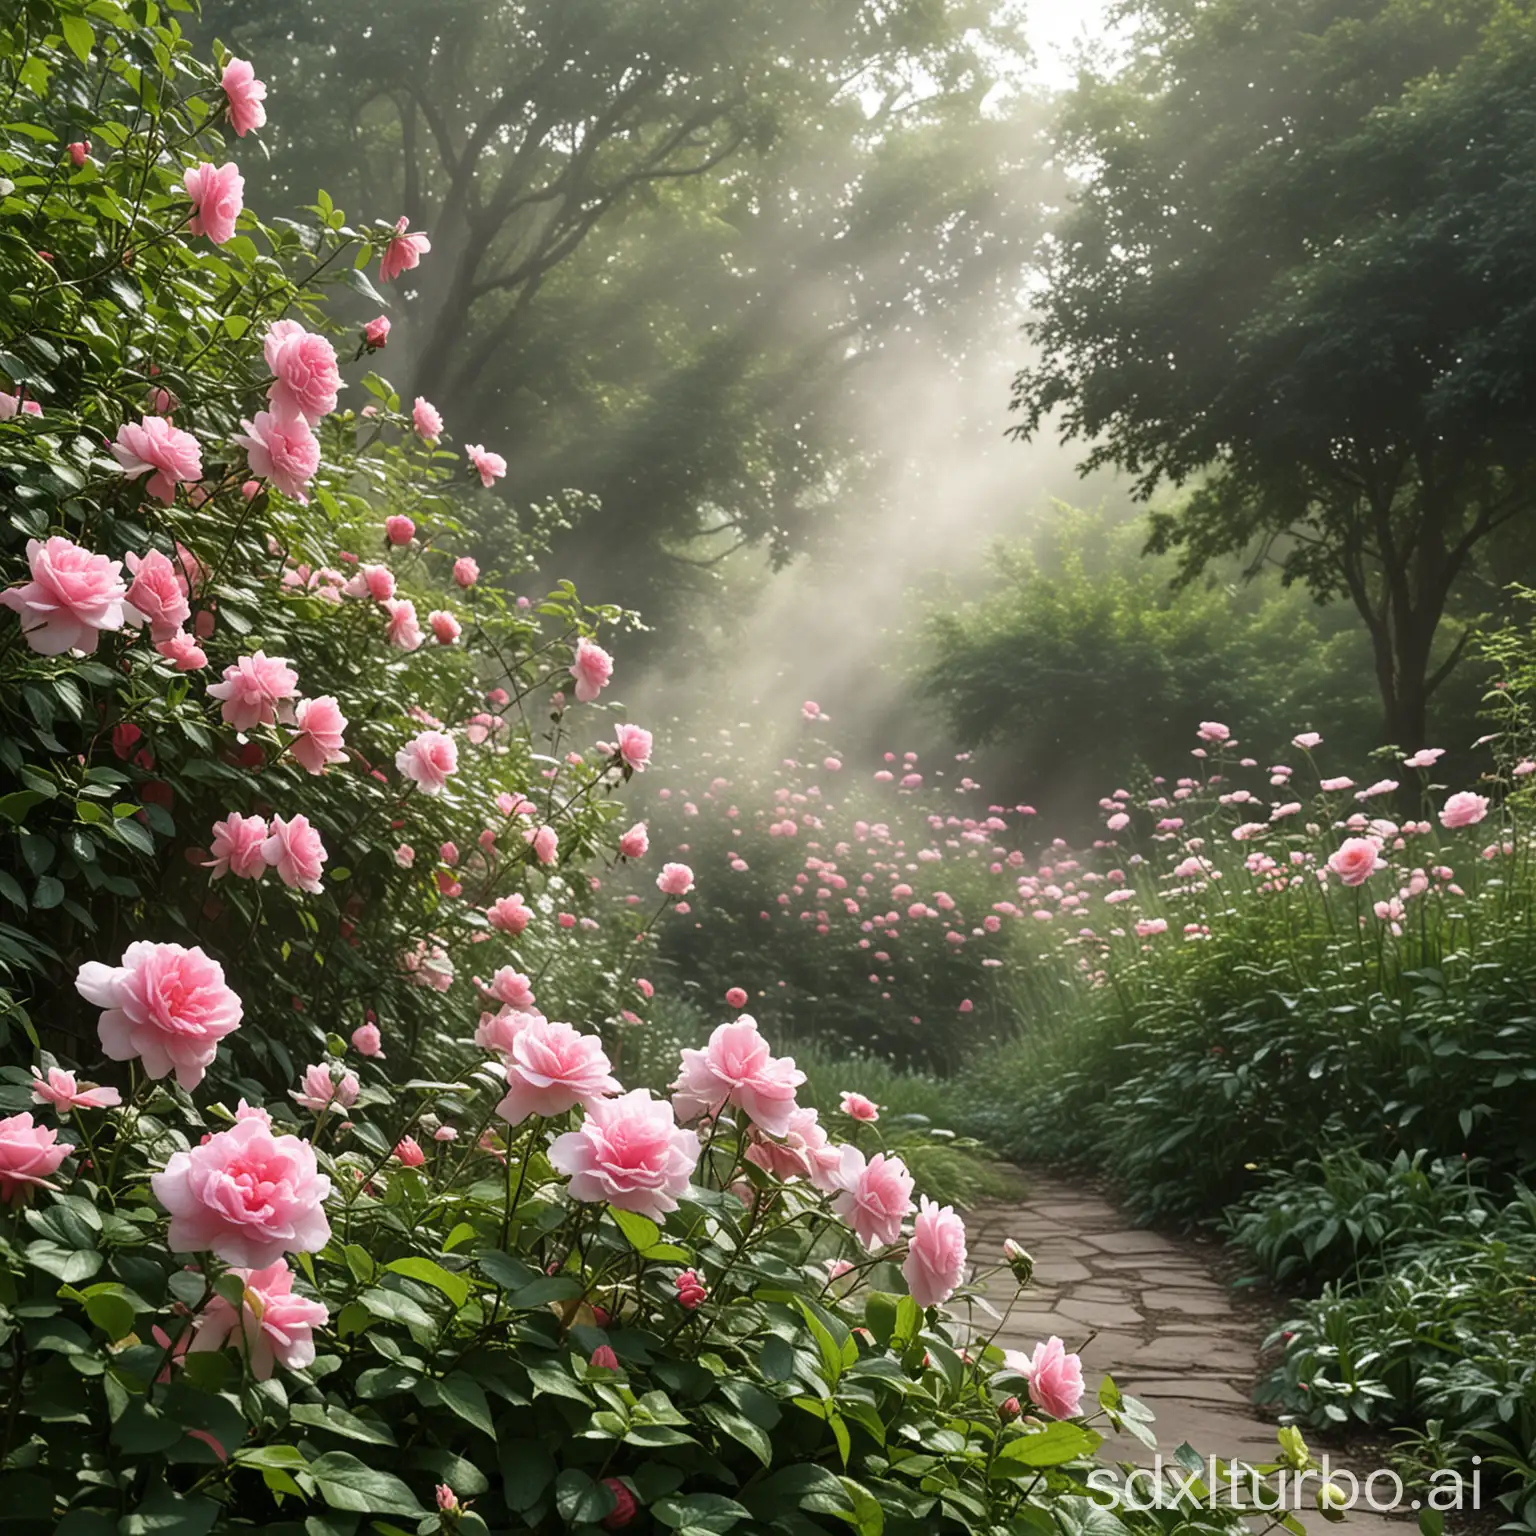 Enchanting-Garden-Scene-with-Rosewater-Mists